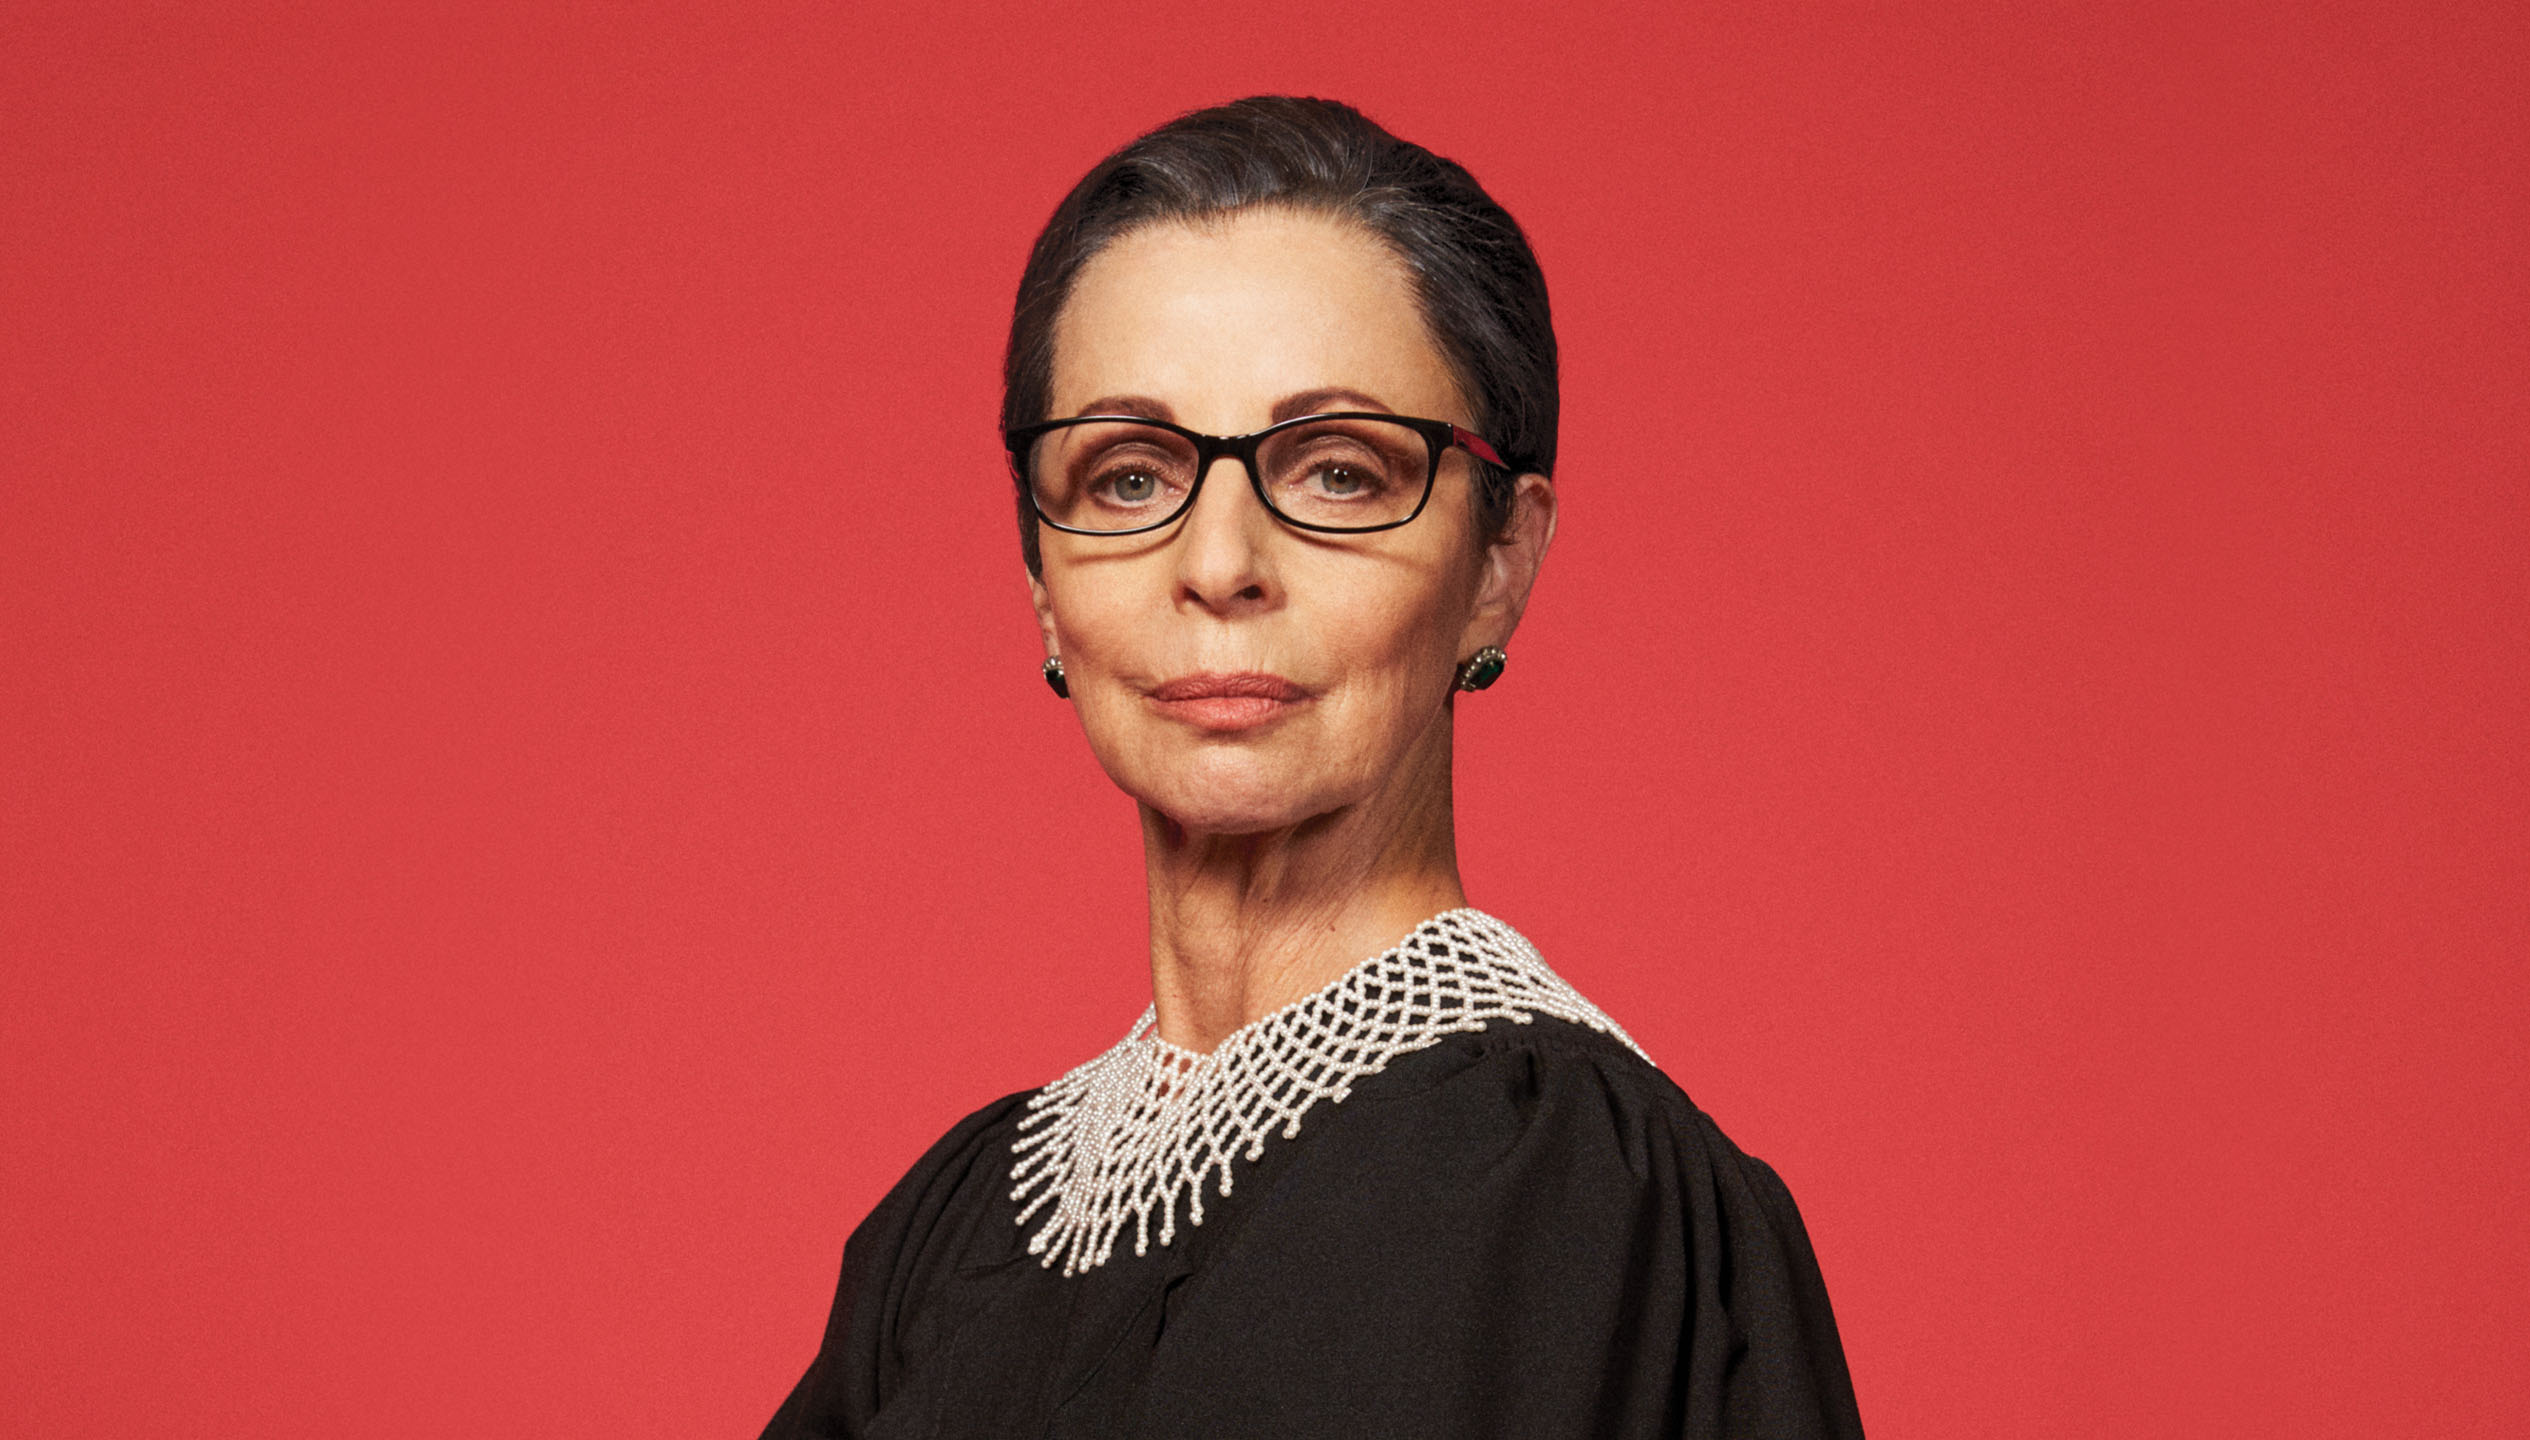 A white woman in her 60s has her hair sleekly pulled back and pursed lips wears black glasses and a lawyer's black robe with white crocheted neck piece. She stands in front of an all-red background.